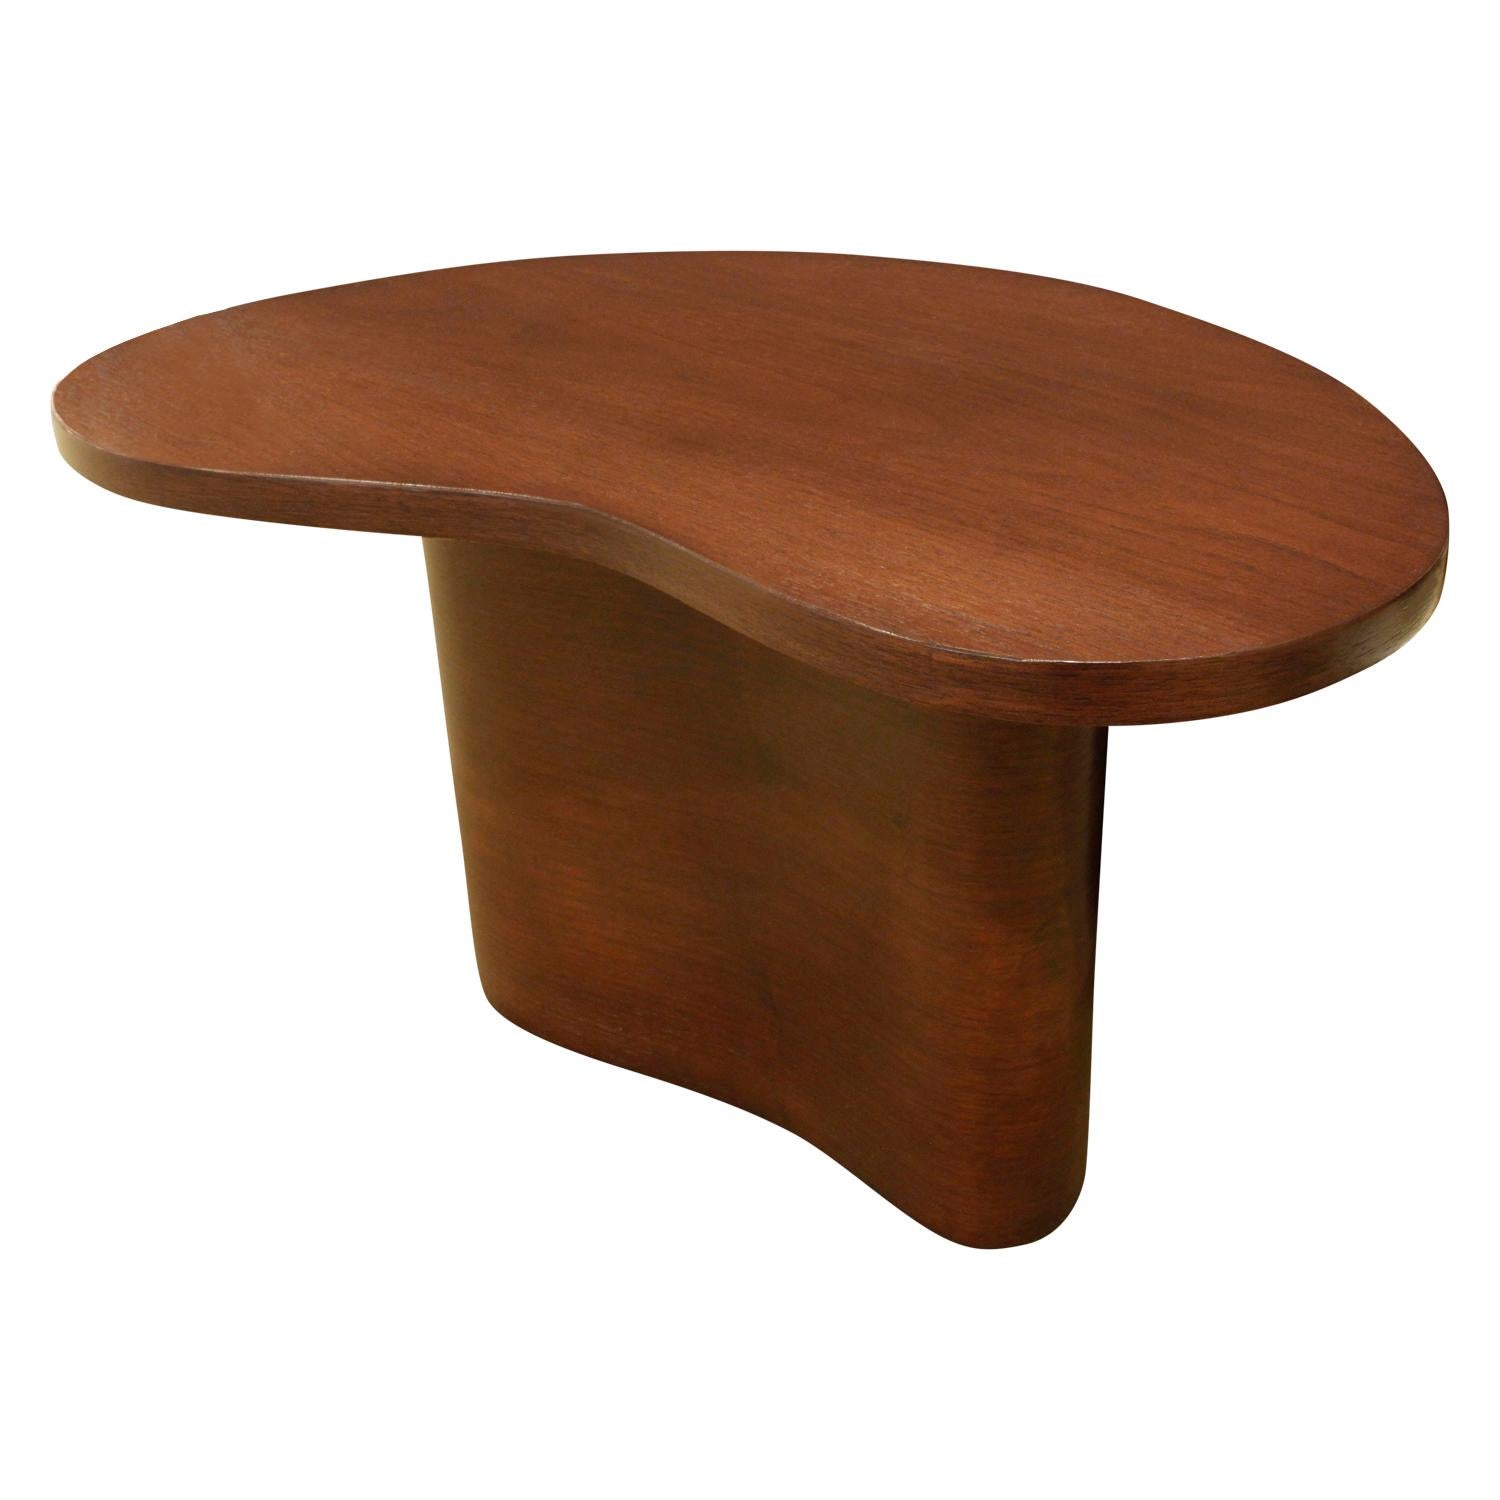 Kidney shaped side / coffee table in walnut attributed to T.H. Robsjohn-Gibbings for Widdicomb, American 1950s. This table is highly reminiscent of the iconic Mesa Table in form and construction. The shape of the base emulates the top. A special